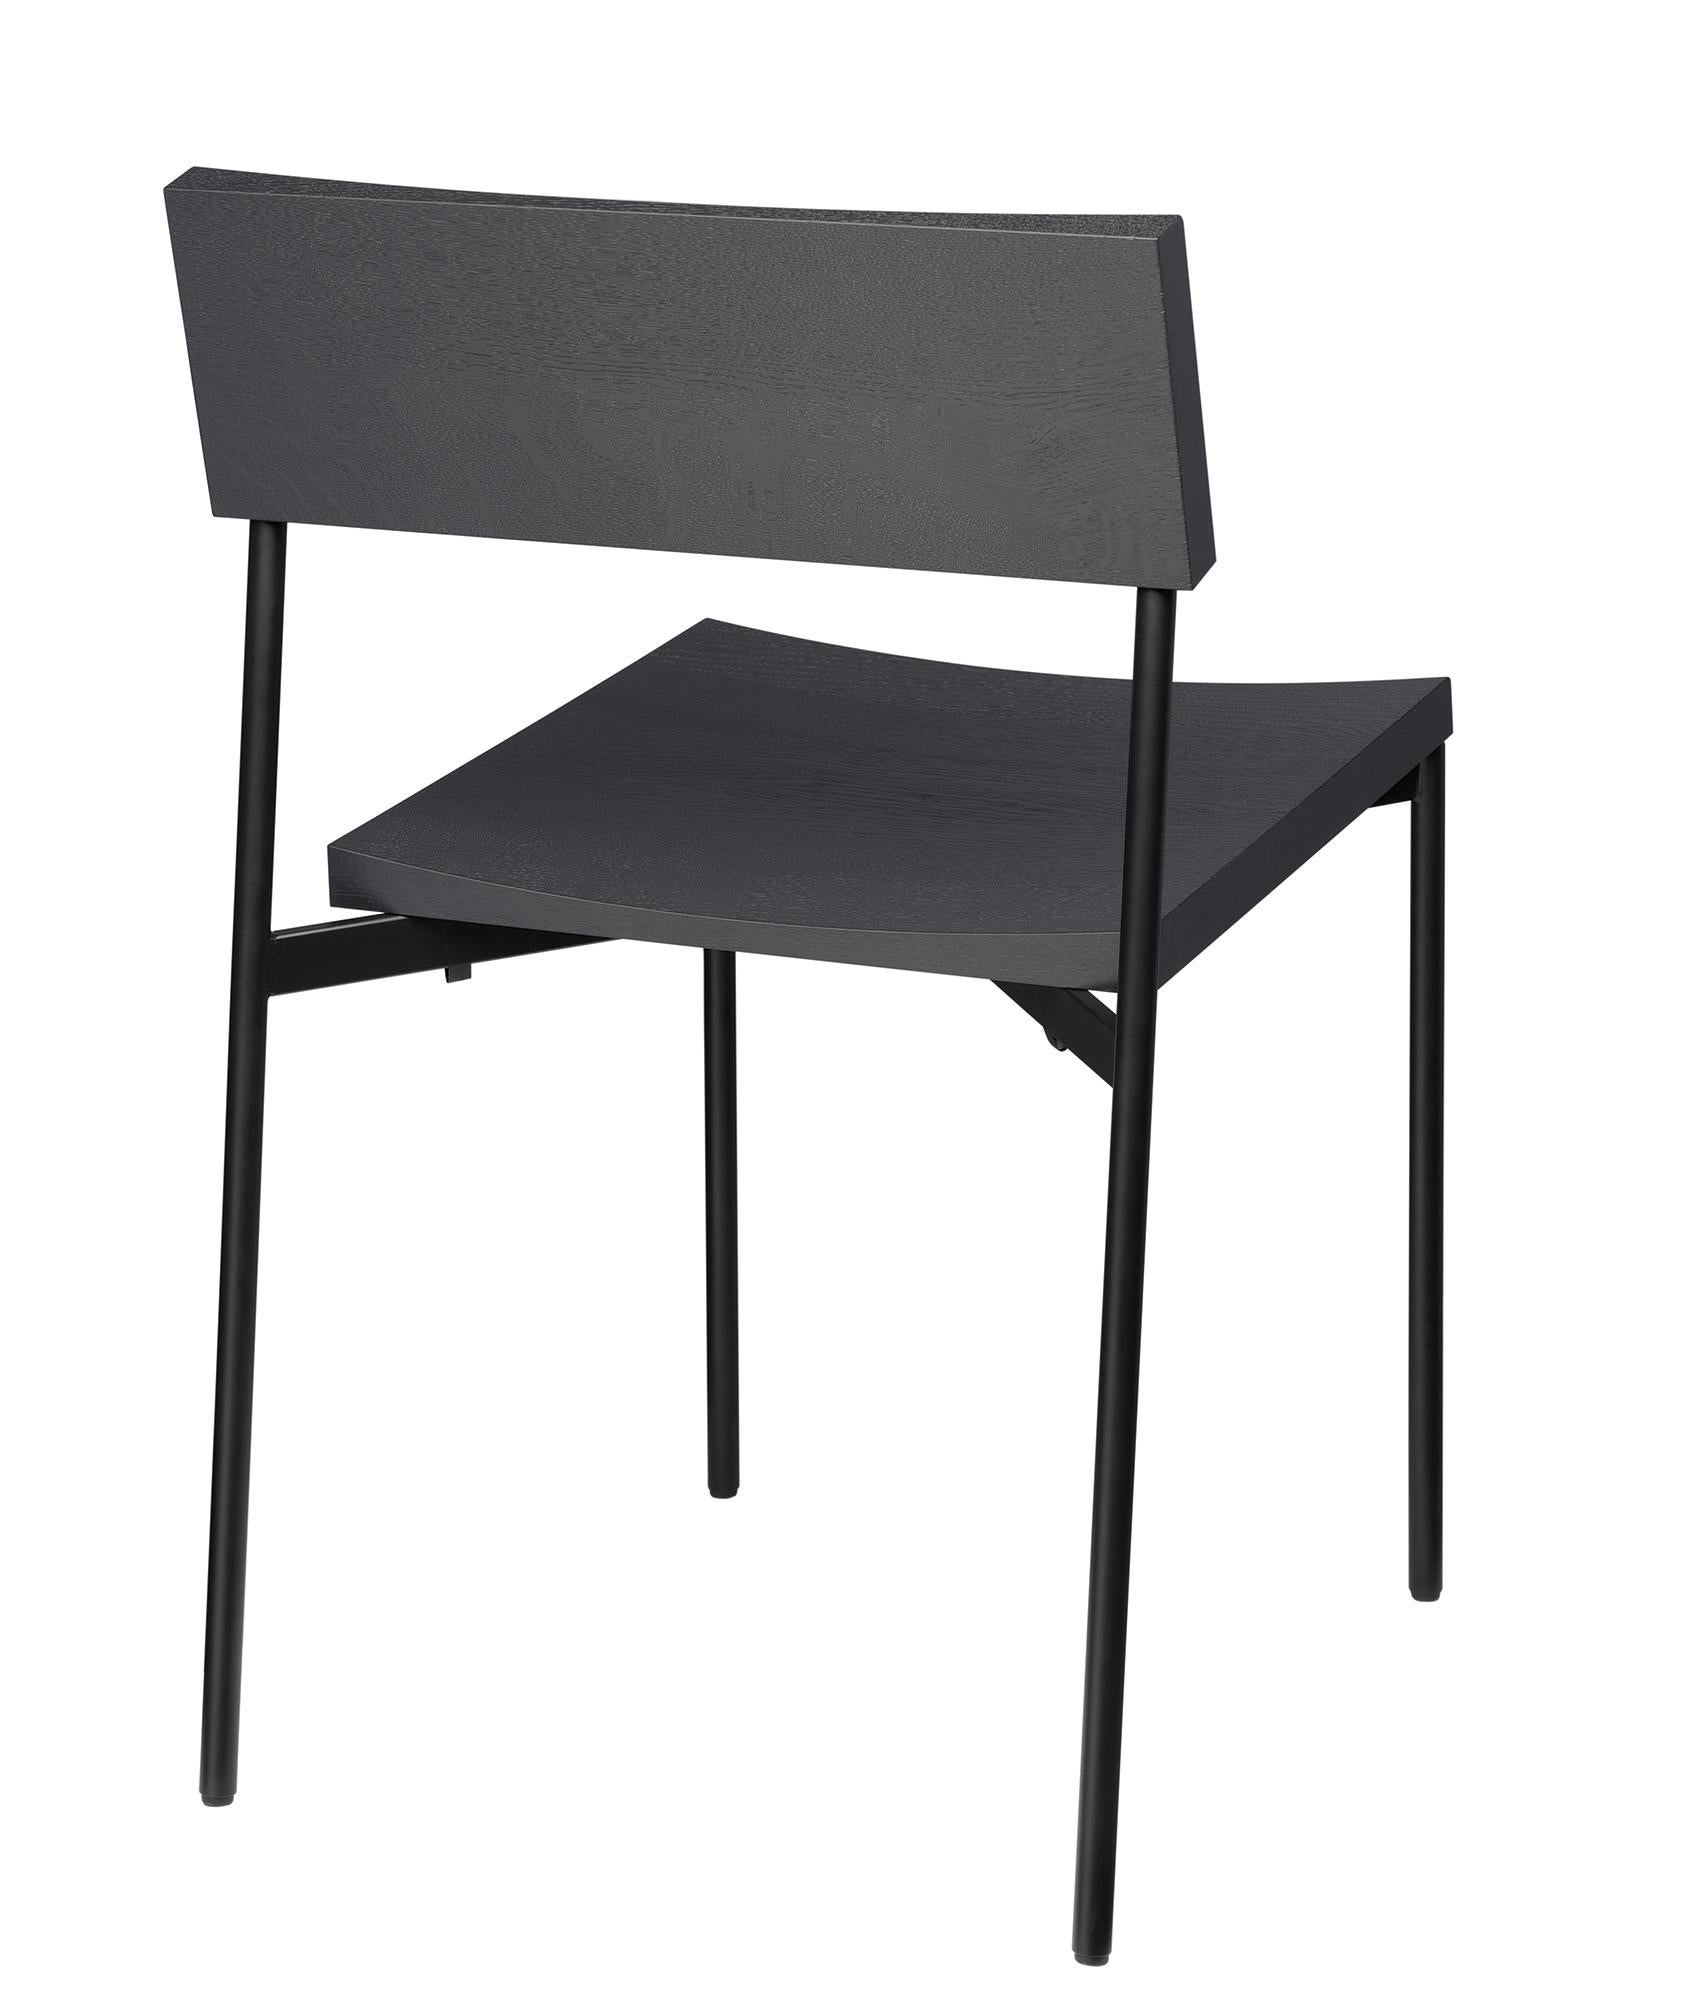 Chair Henning with its minimal and linear Silhouette unifies a shaped solid wood seat and backrest with powder-coated steel or brushed stainless steel frame. Henning is a comfortable and elegant stackable chair that serves various interior